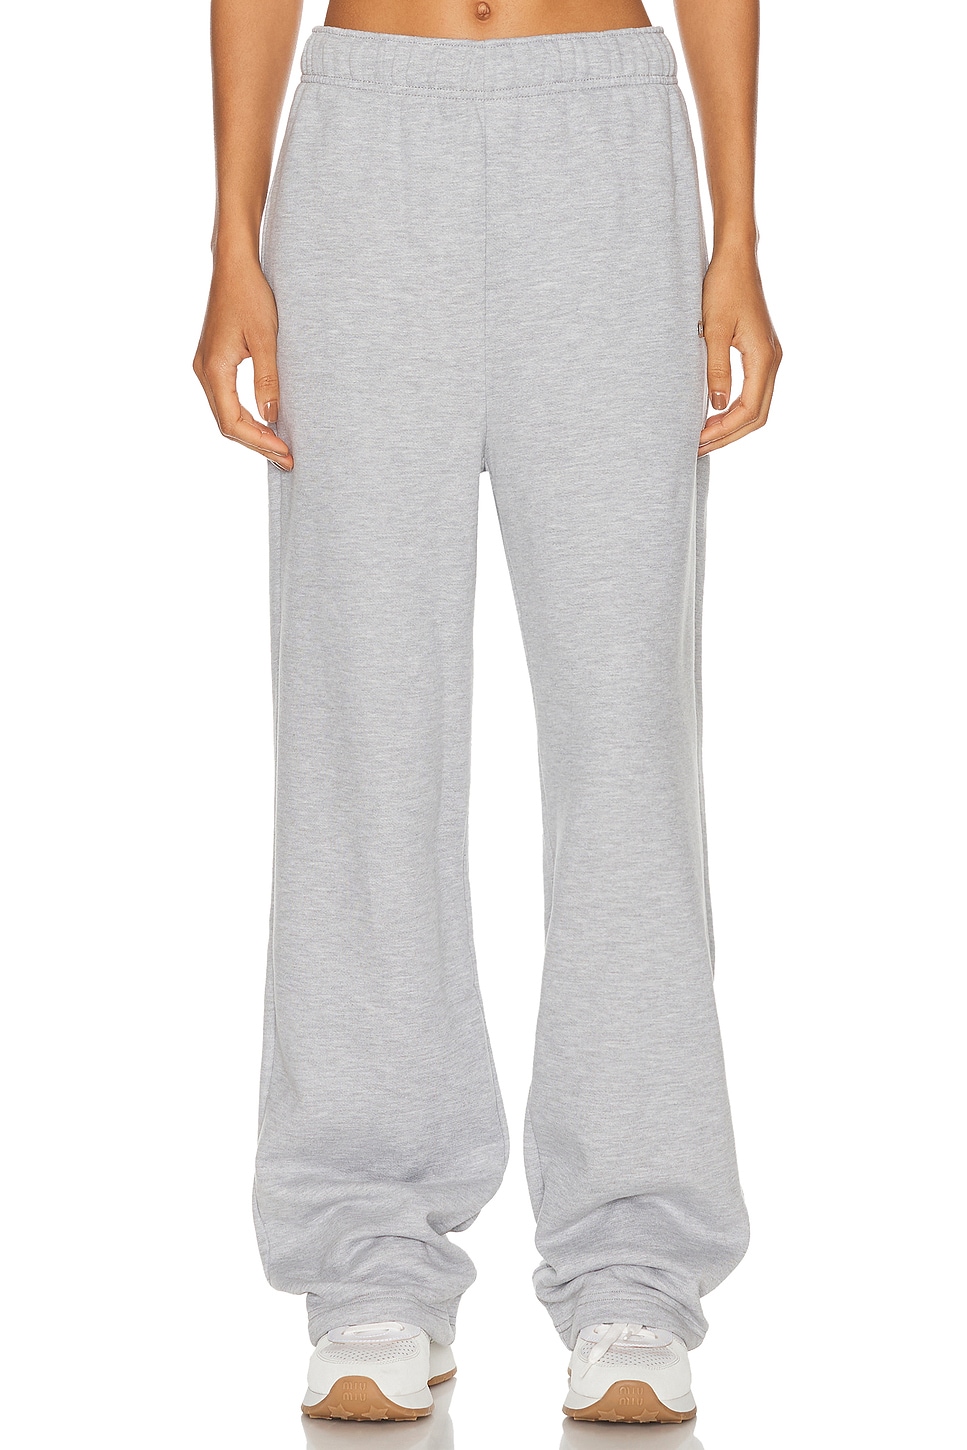 Image 1 of alo Accolade Straight Leg Sweatpant in Athletic Heather Grey